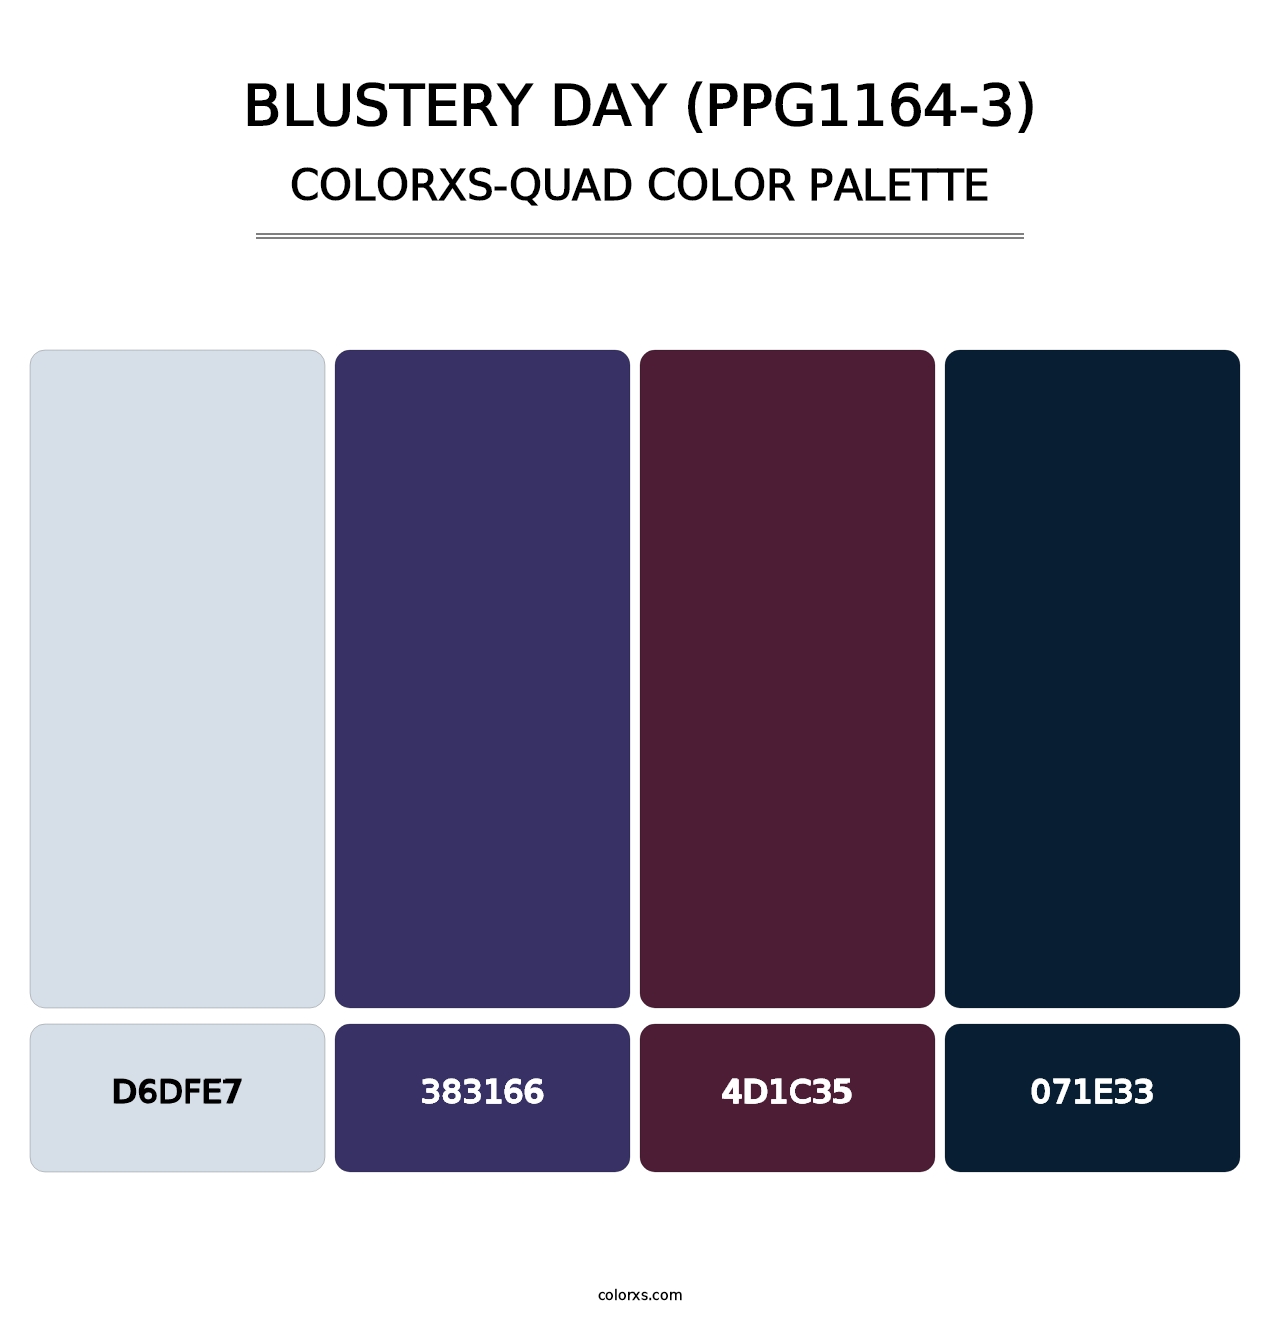 Blustery Day (PPG1164-3) - Colorxs Quad Palette